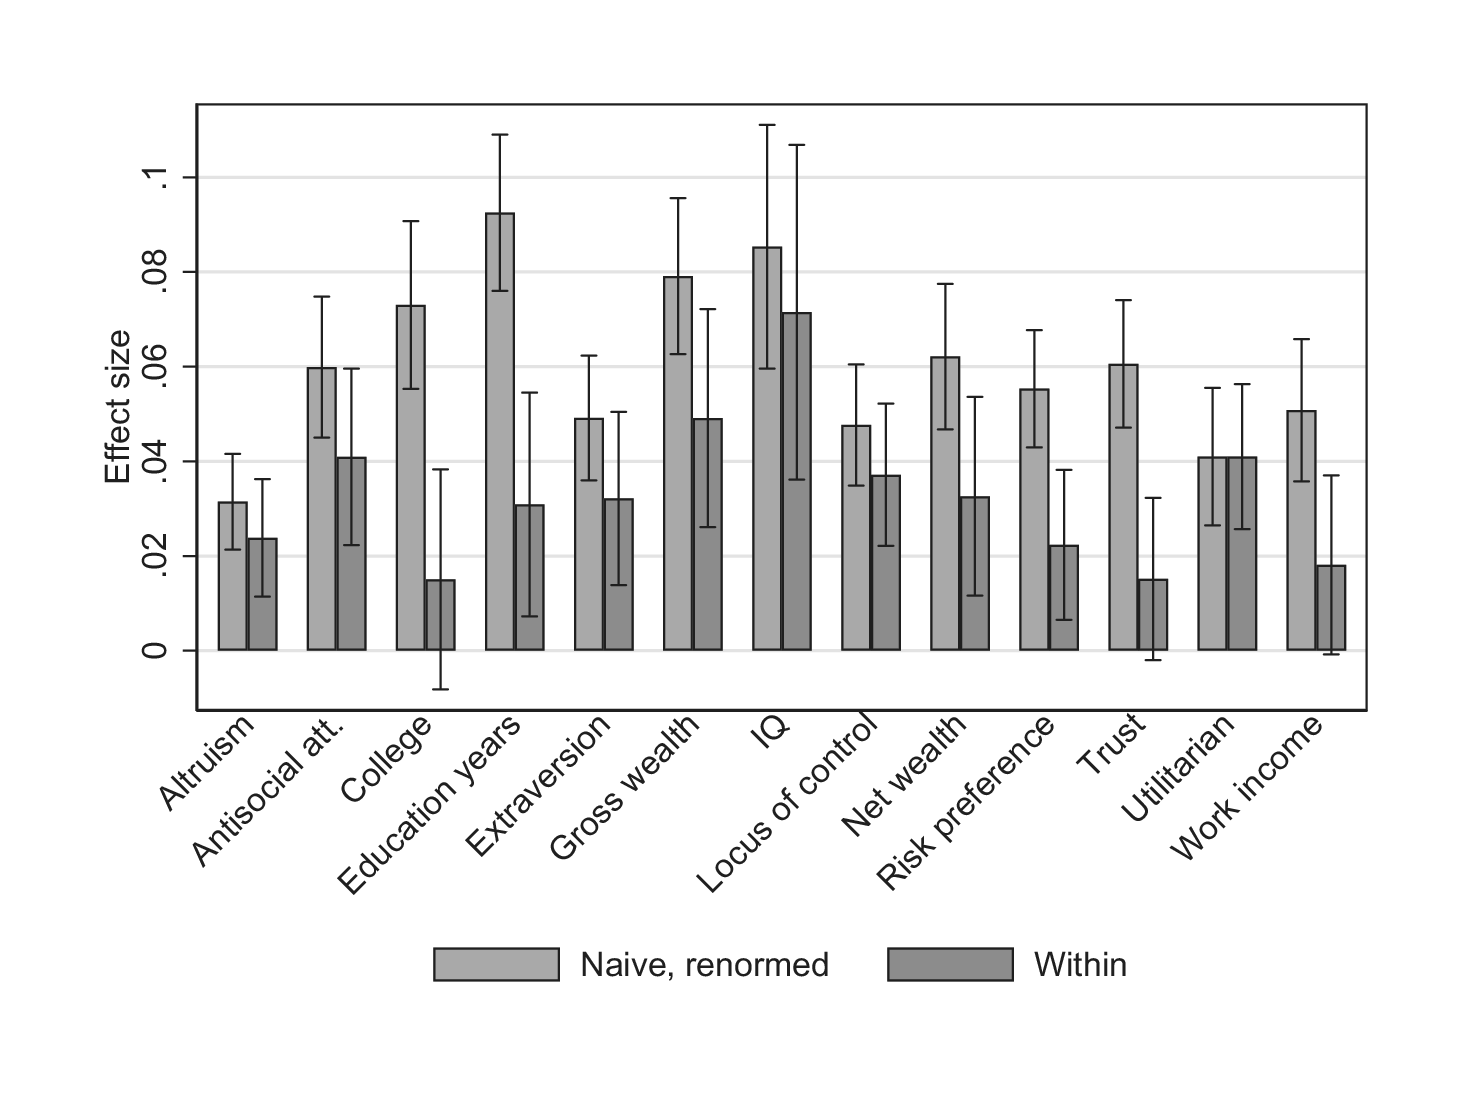 Figure 2: Main results, all outcomes, ‘naive’ versus ‘within’. Average beta coefficients across all outcomes, per model and predictor. 90% confidence intervals shown.